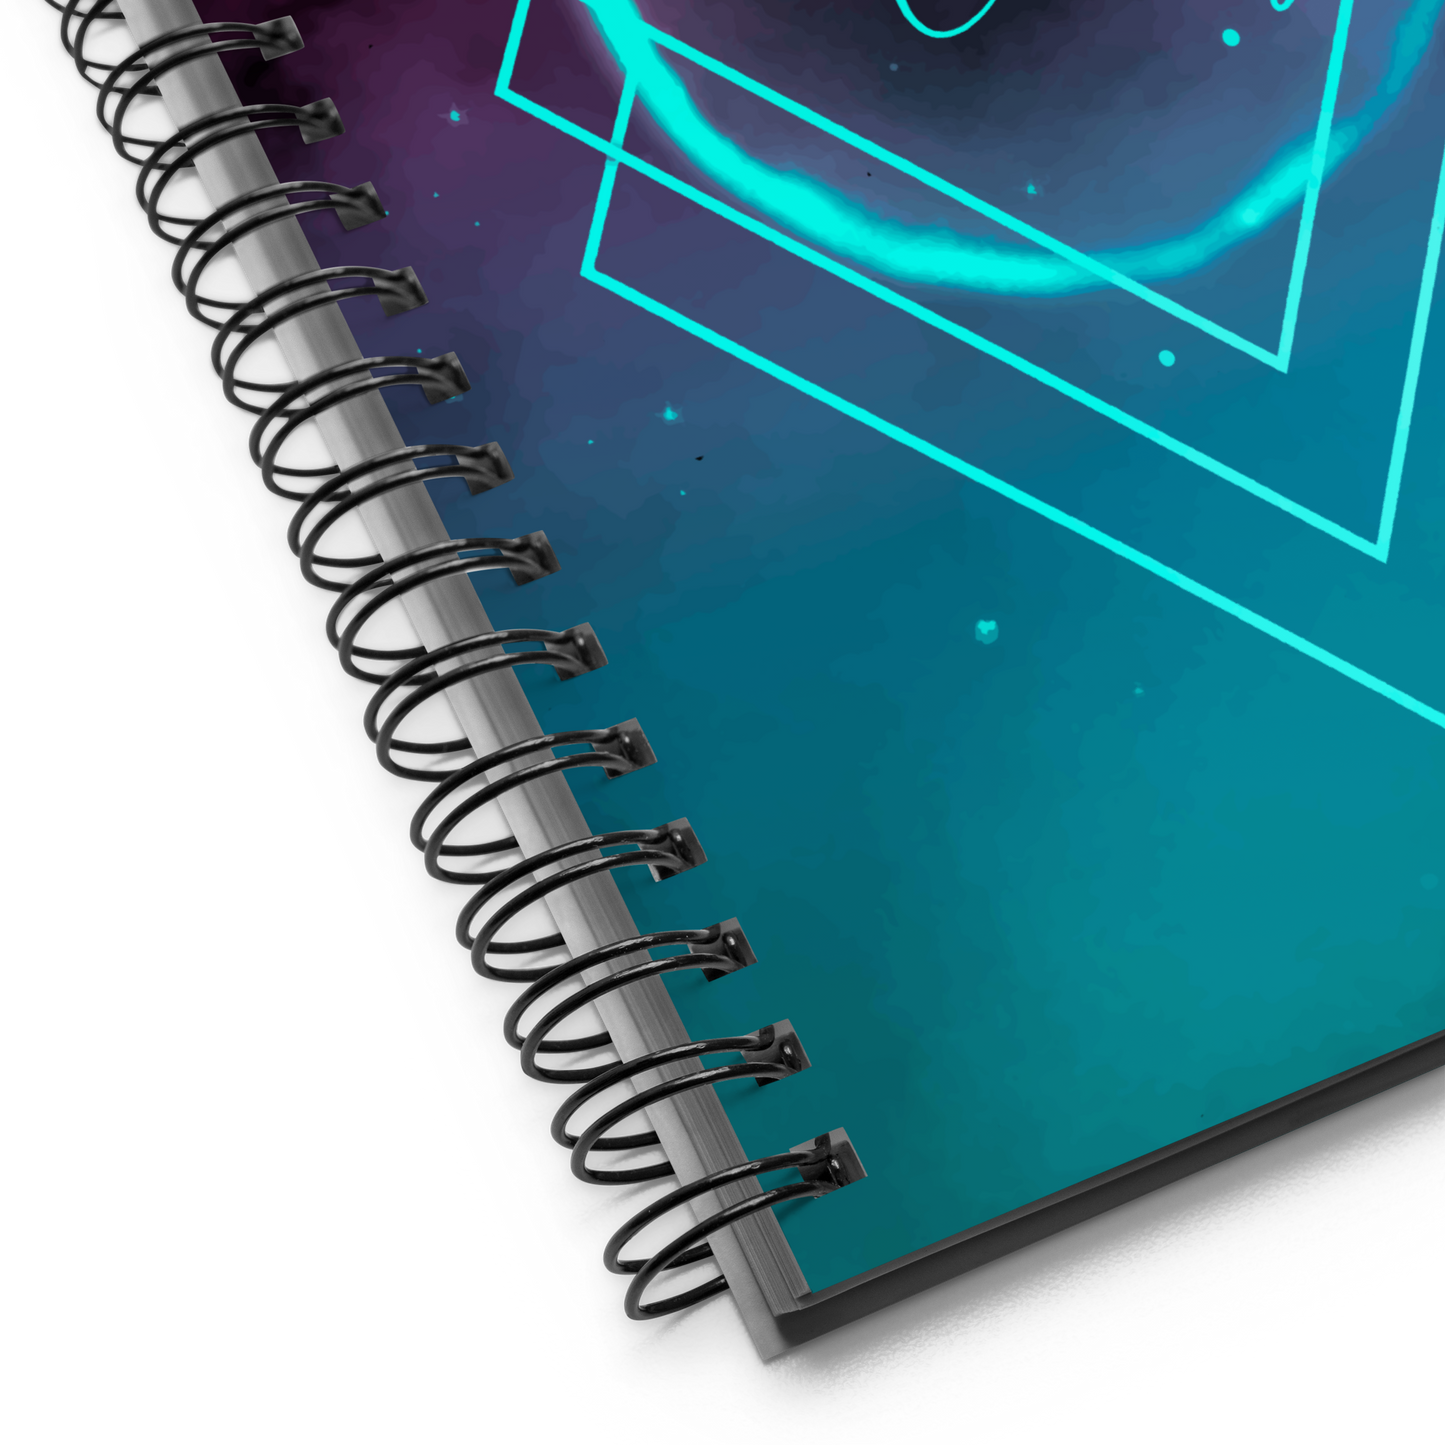 Diamond Series - Neon Lagoon - Spiral Notebook Dotted Pages Bullet Journal